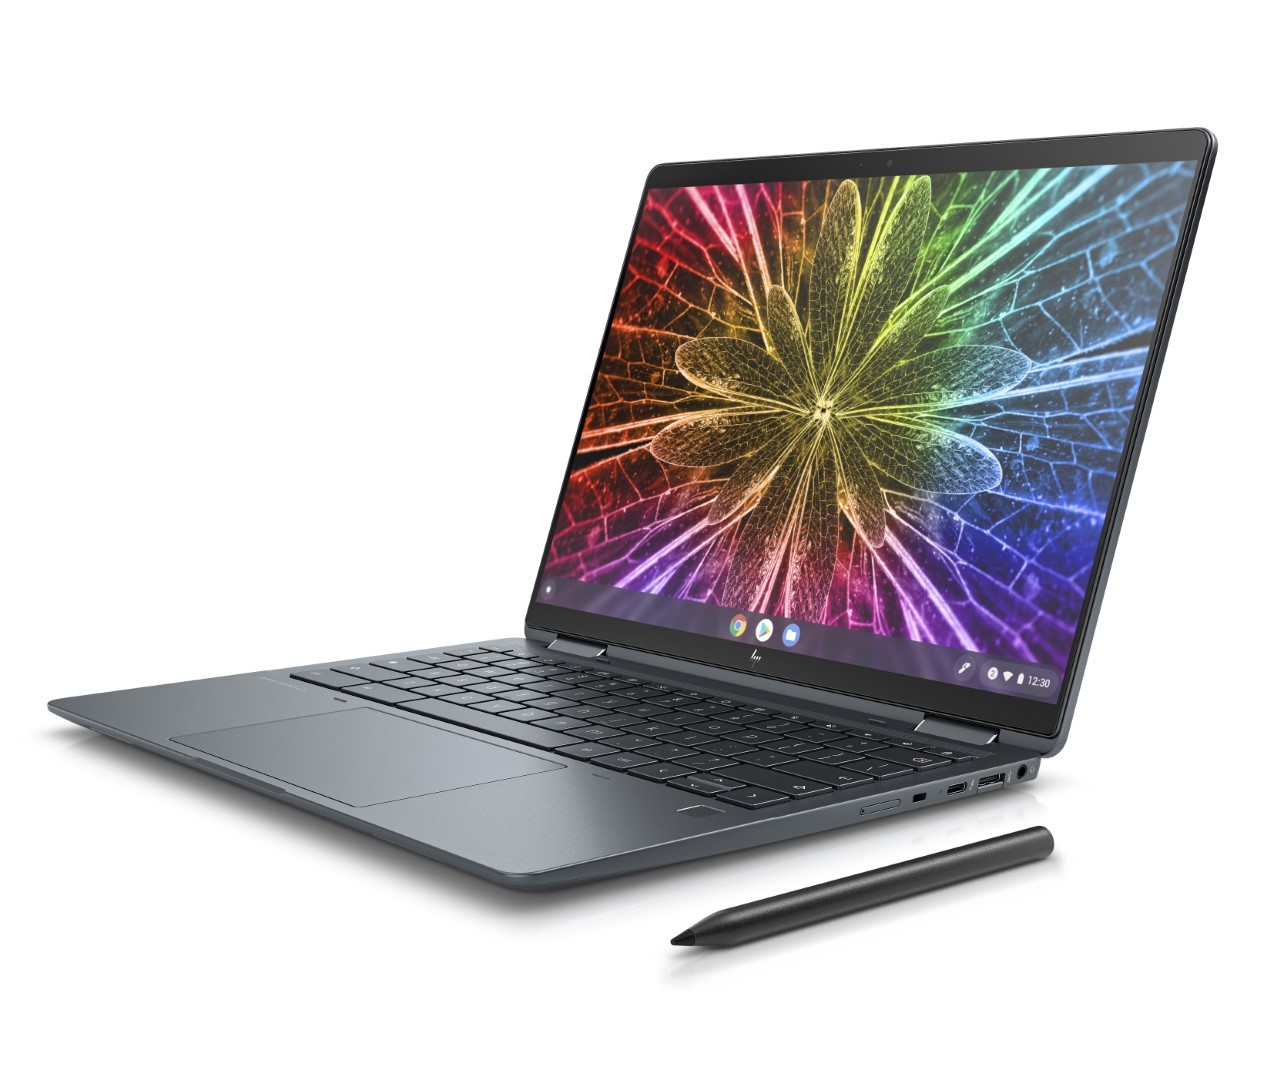 HP Elite Dragonfly Chromebook and Dragonfly Chromebook Enterprise  convertibles are the first to use 12th gen Intel vPro, advanced  collaboration, and haptic touchpad features - NotebookCheck.net News